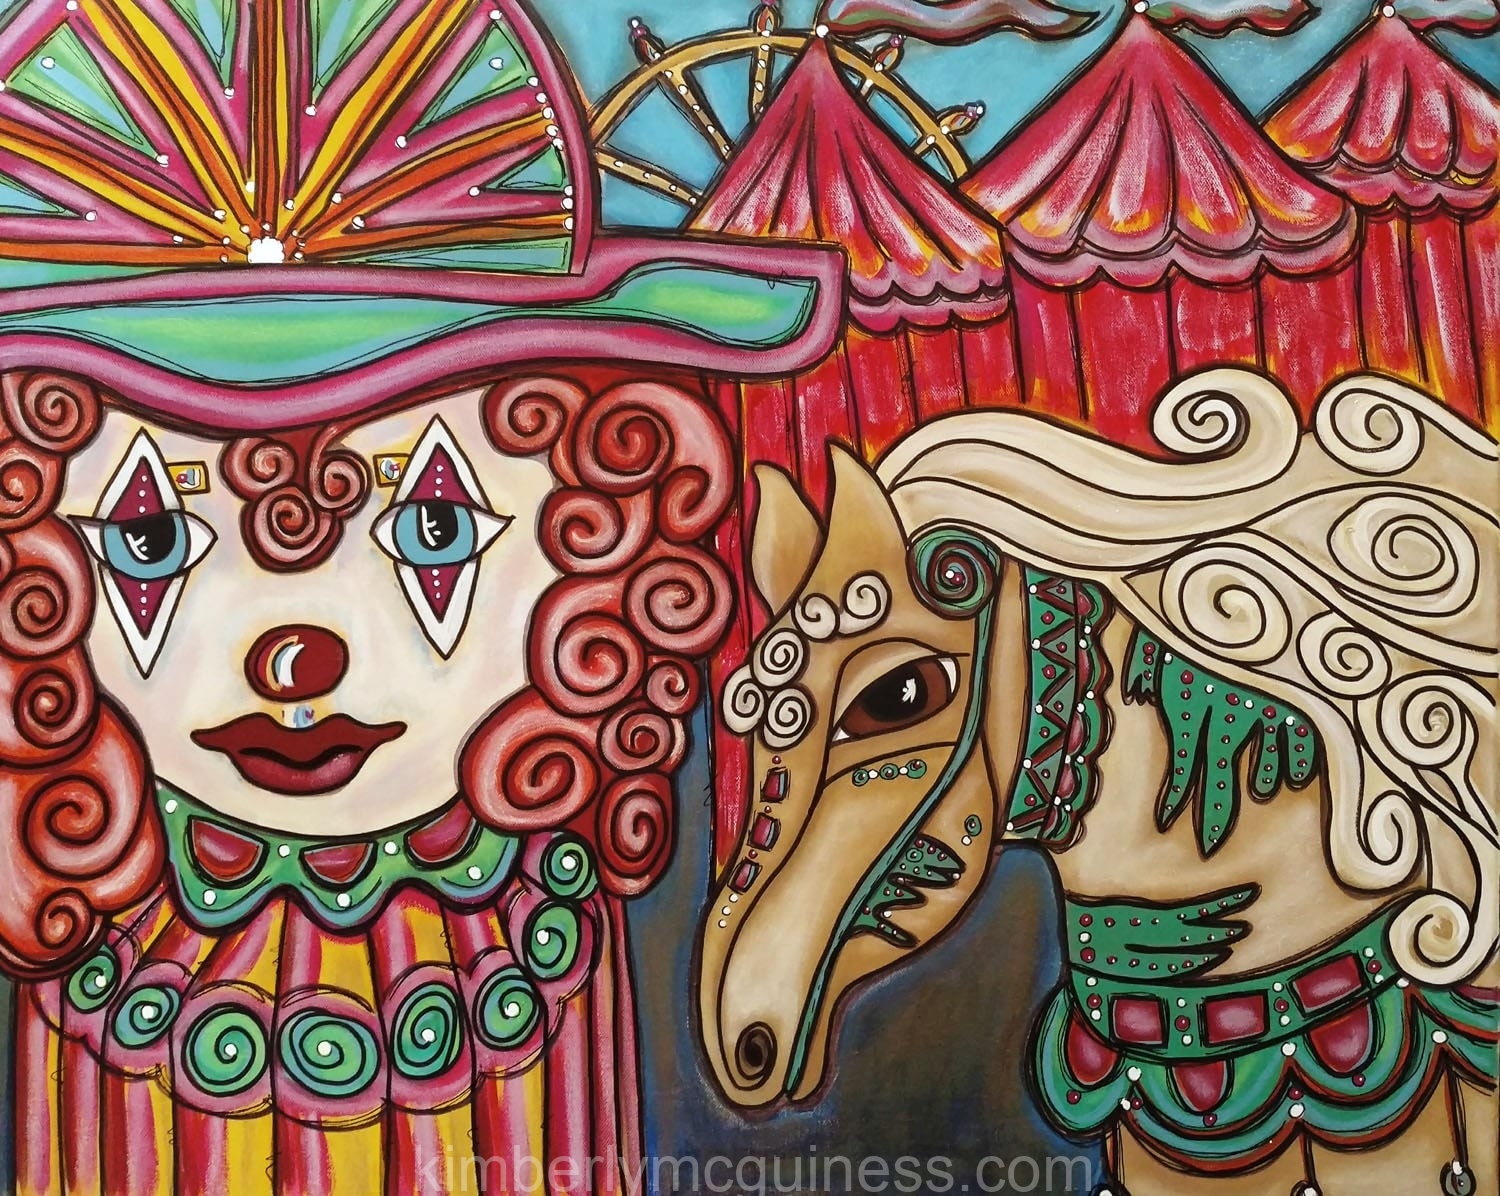 a red headed clown and tan horse infront of red circus tents